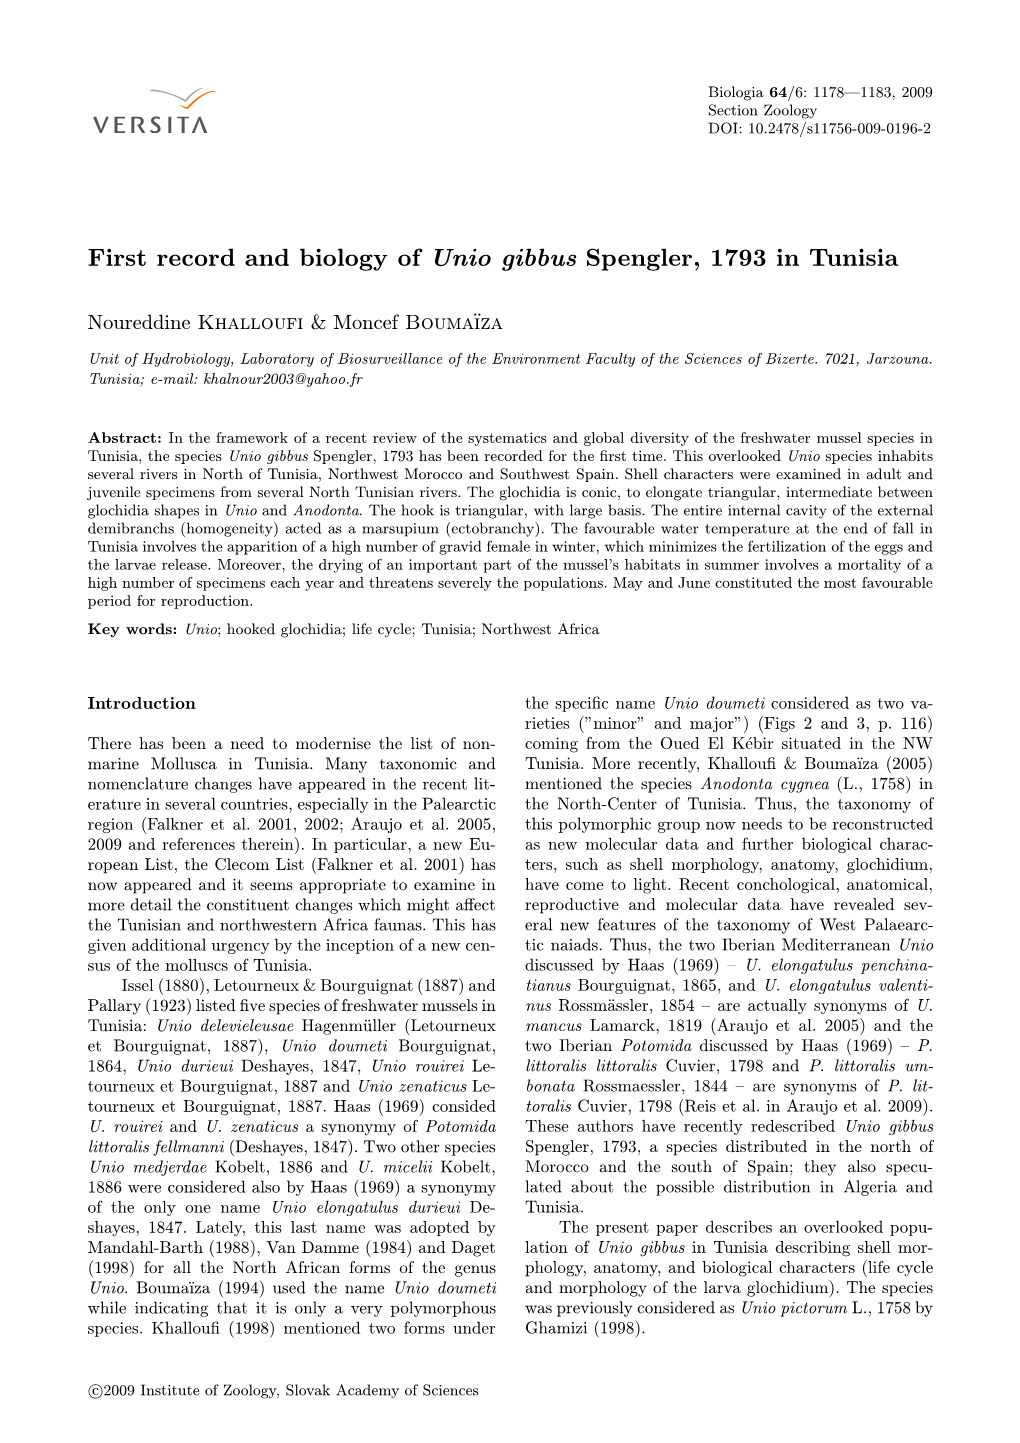 First Record and Biology of Unio Gibbus Spengler, 1793 in Tunisia